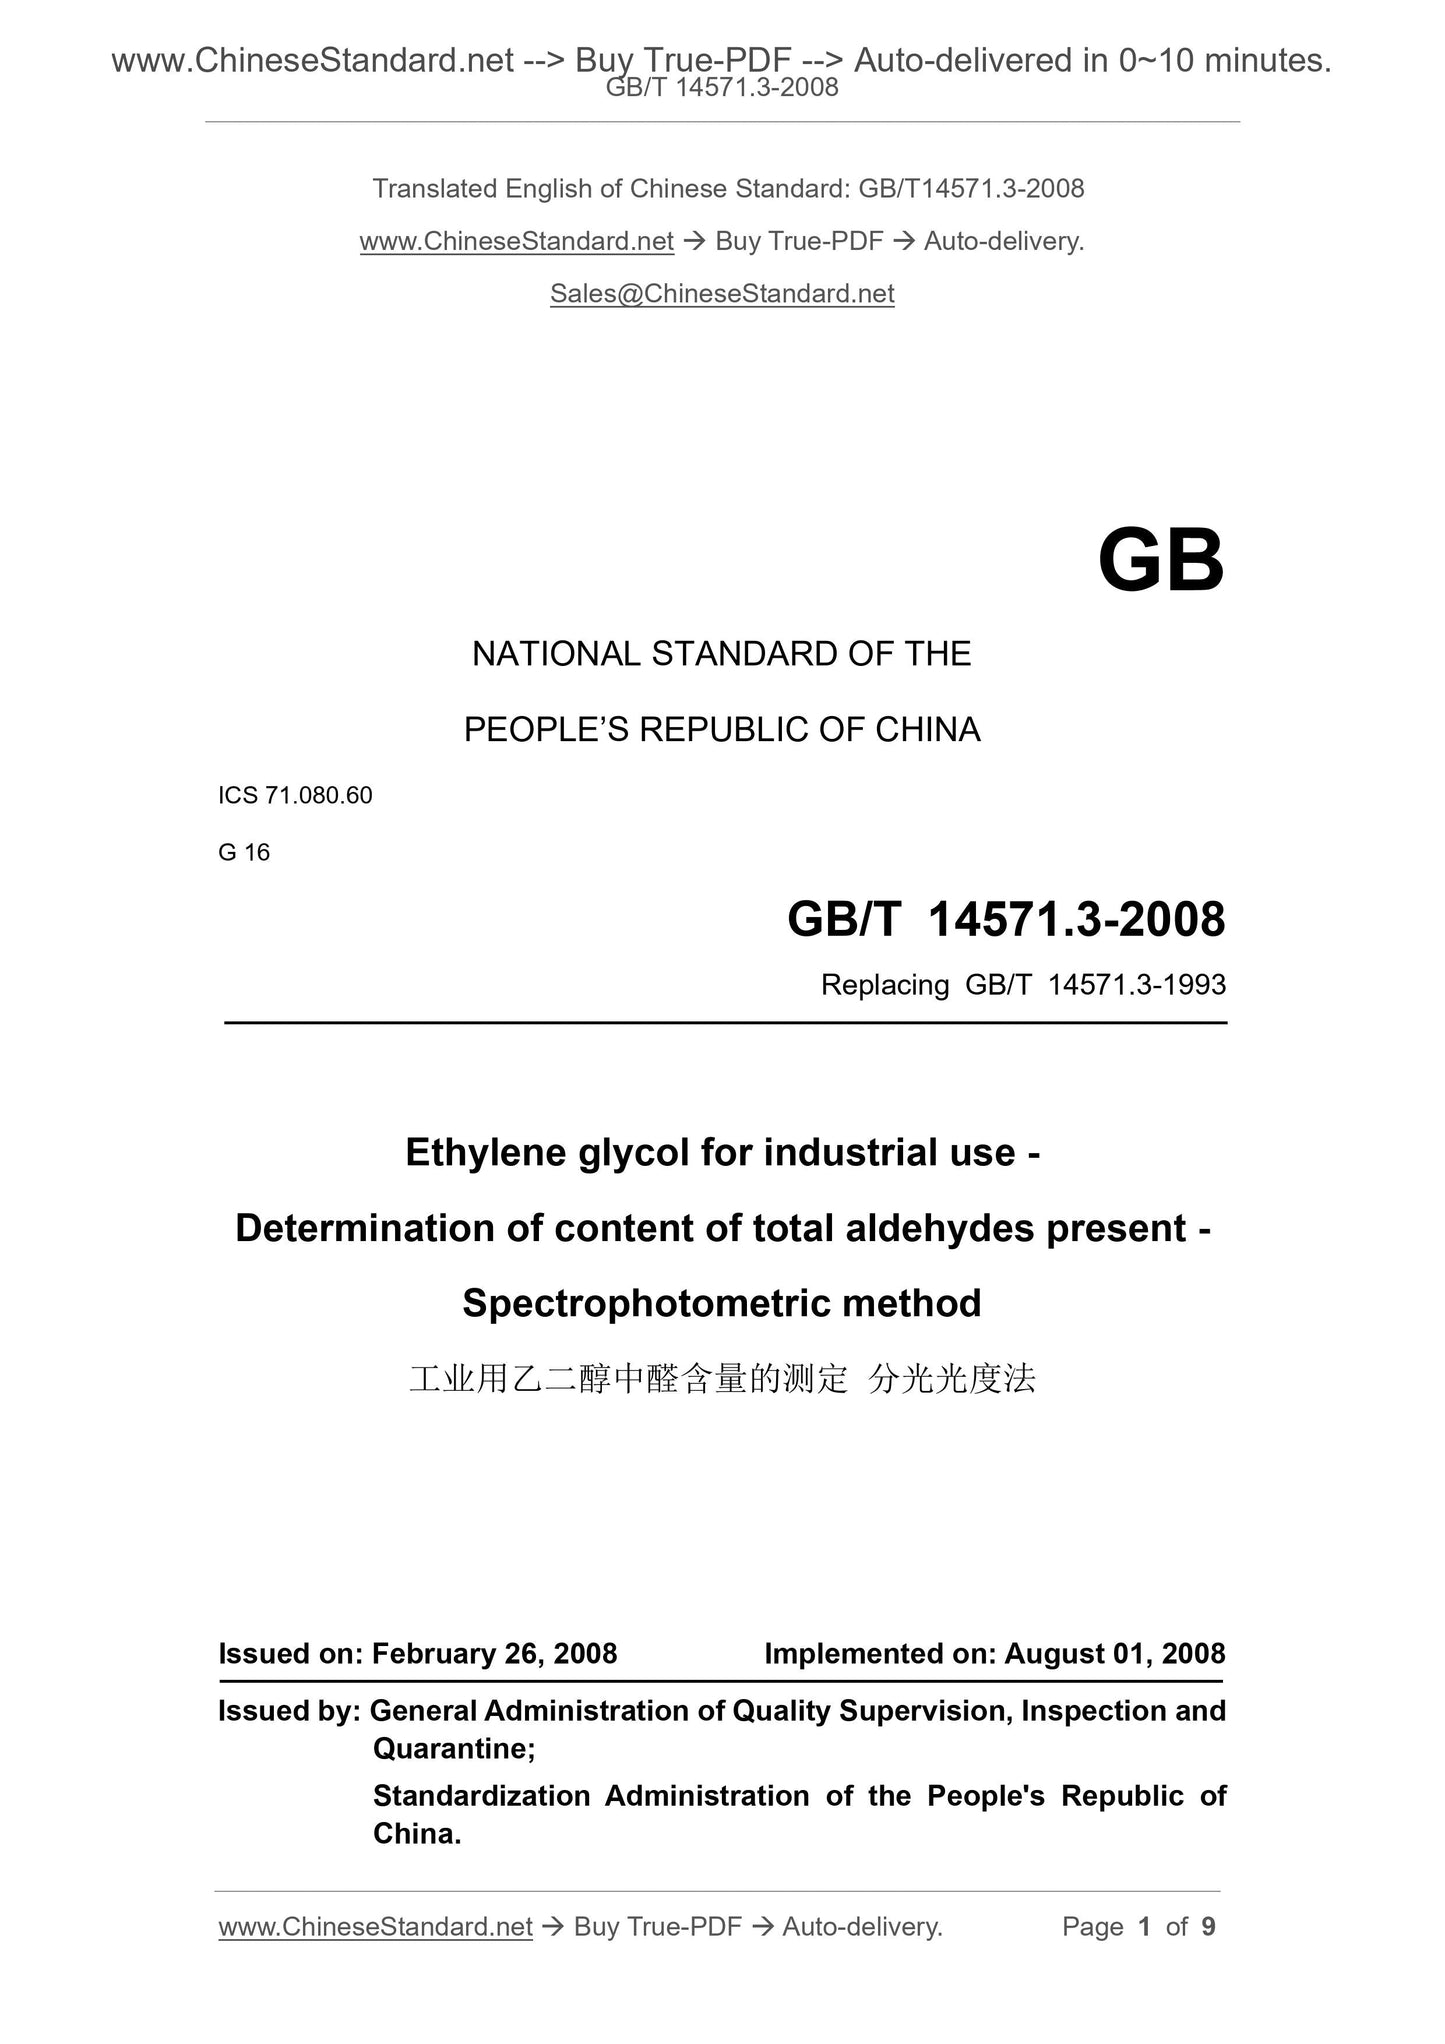 GB/T 14571.3-2008 Page 1